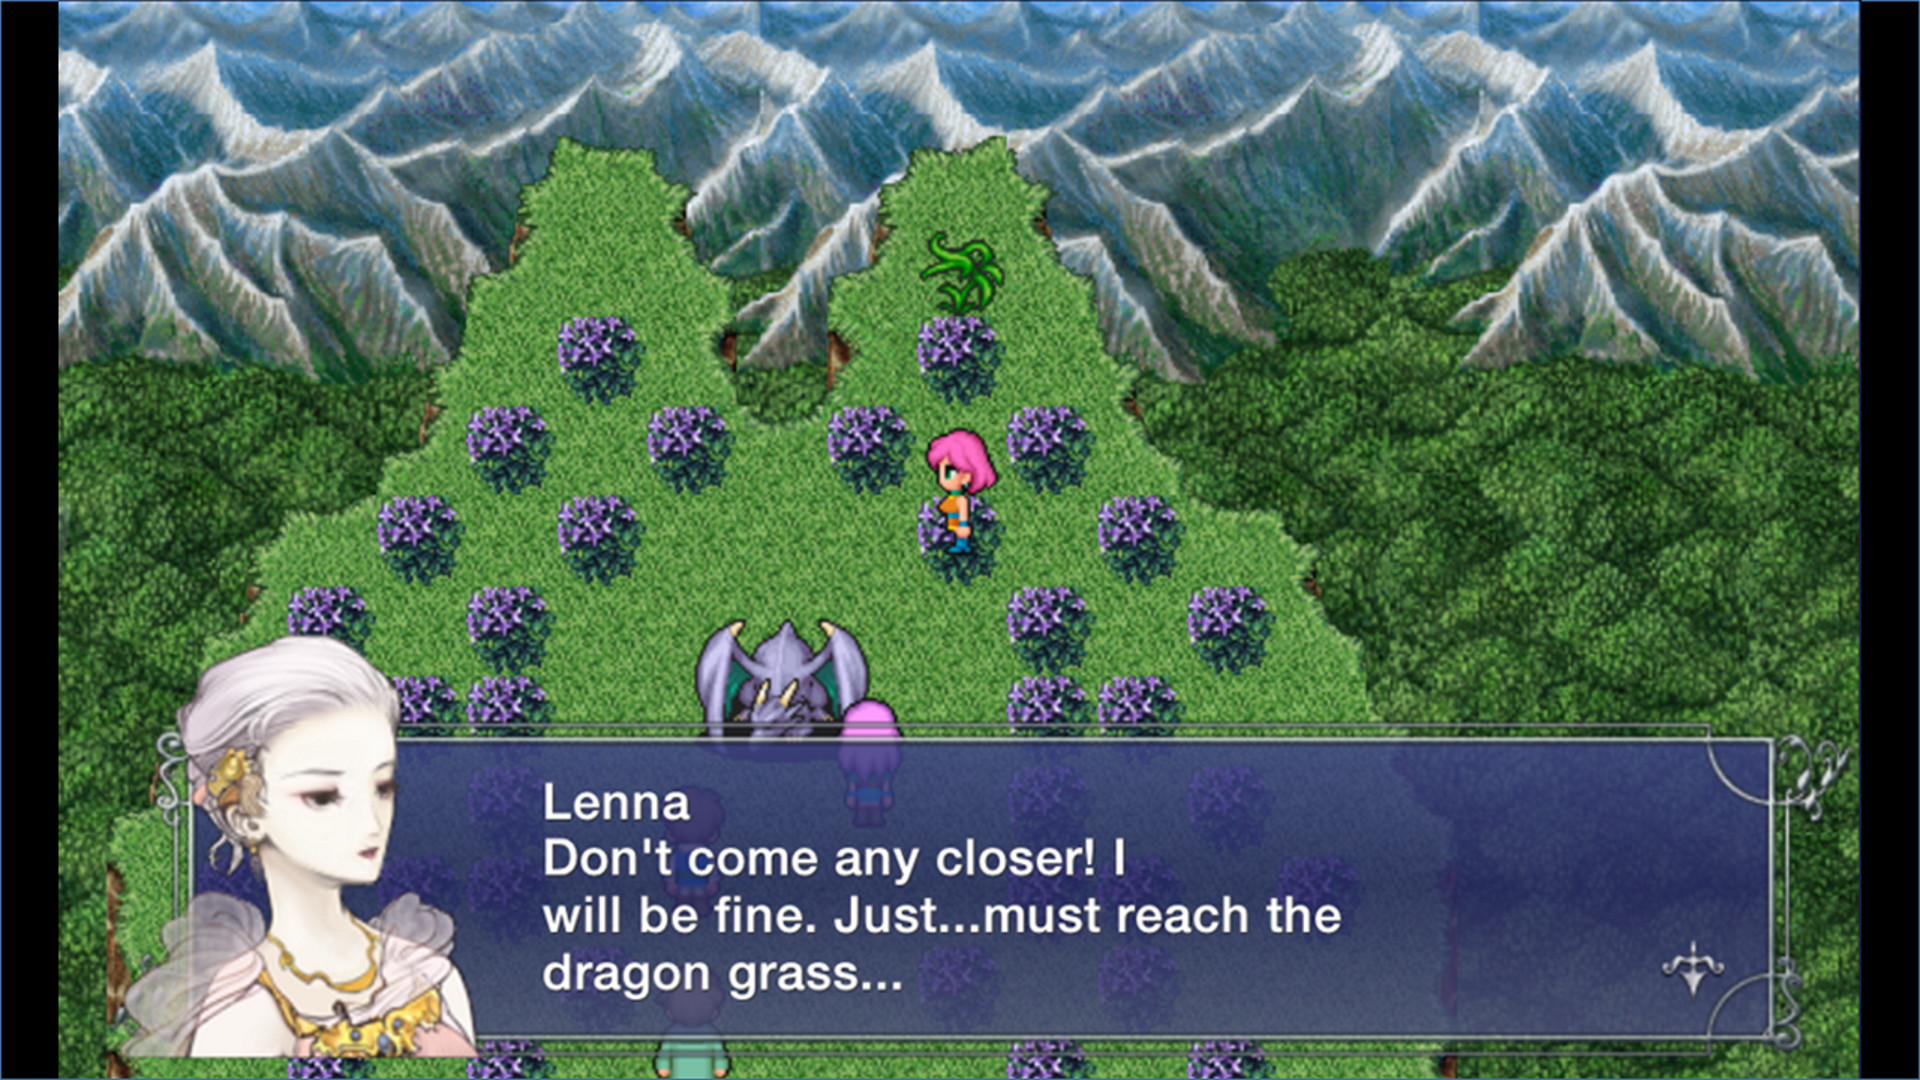 Final Fantasy V Is Coming To The PC On September 24th